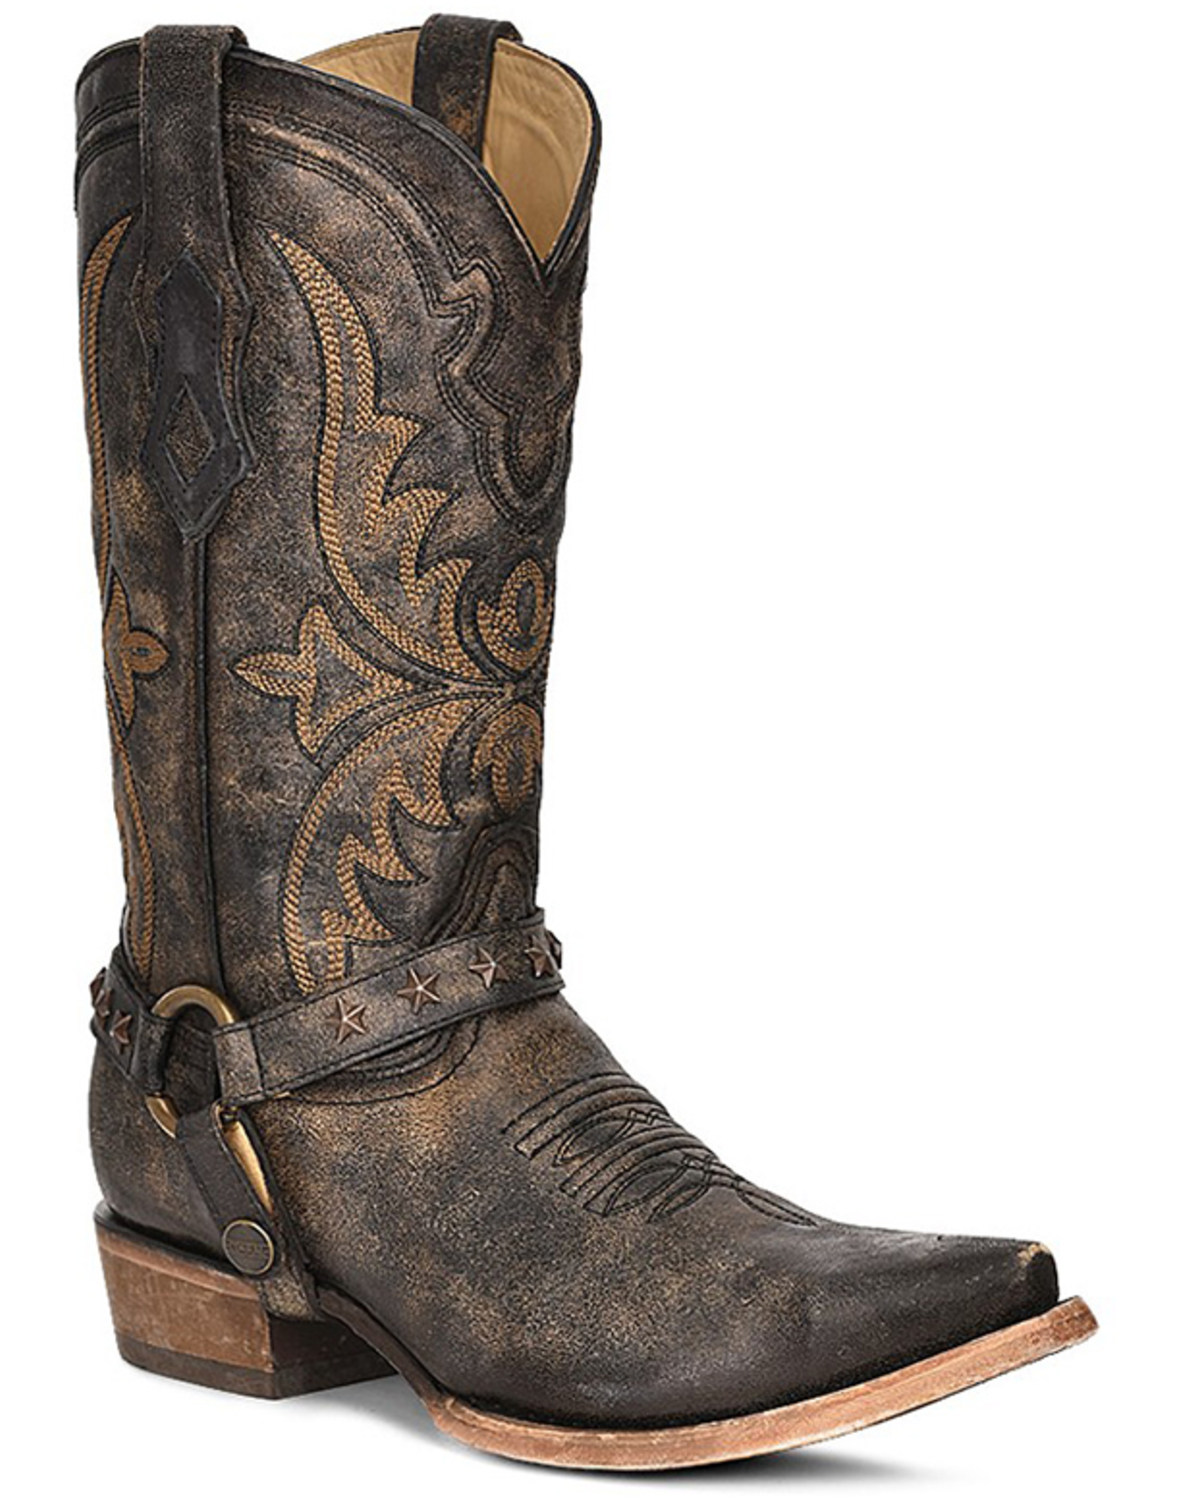 Corral Men's Embroidered and Harness Western Boots - Snip Toe